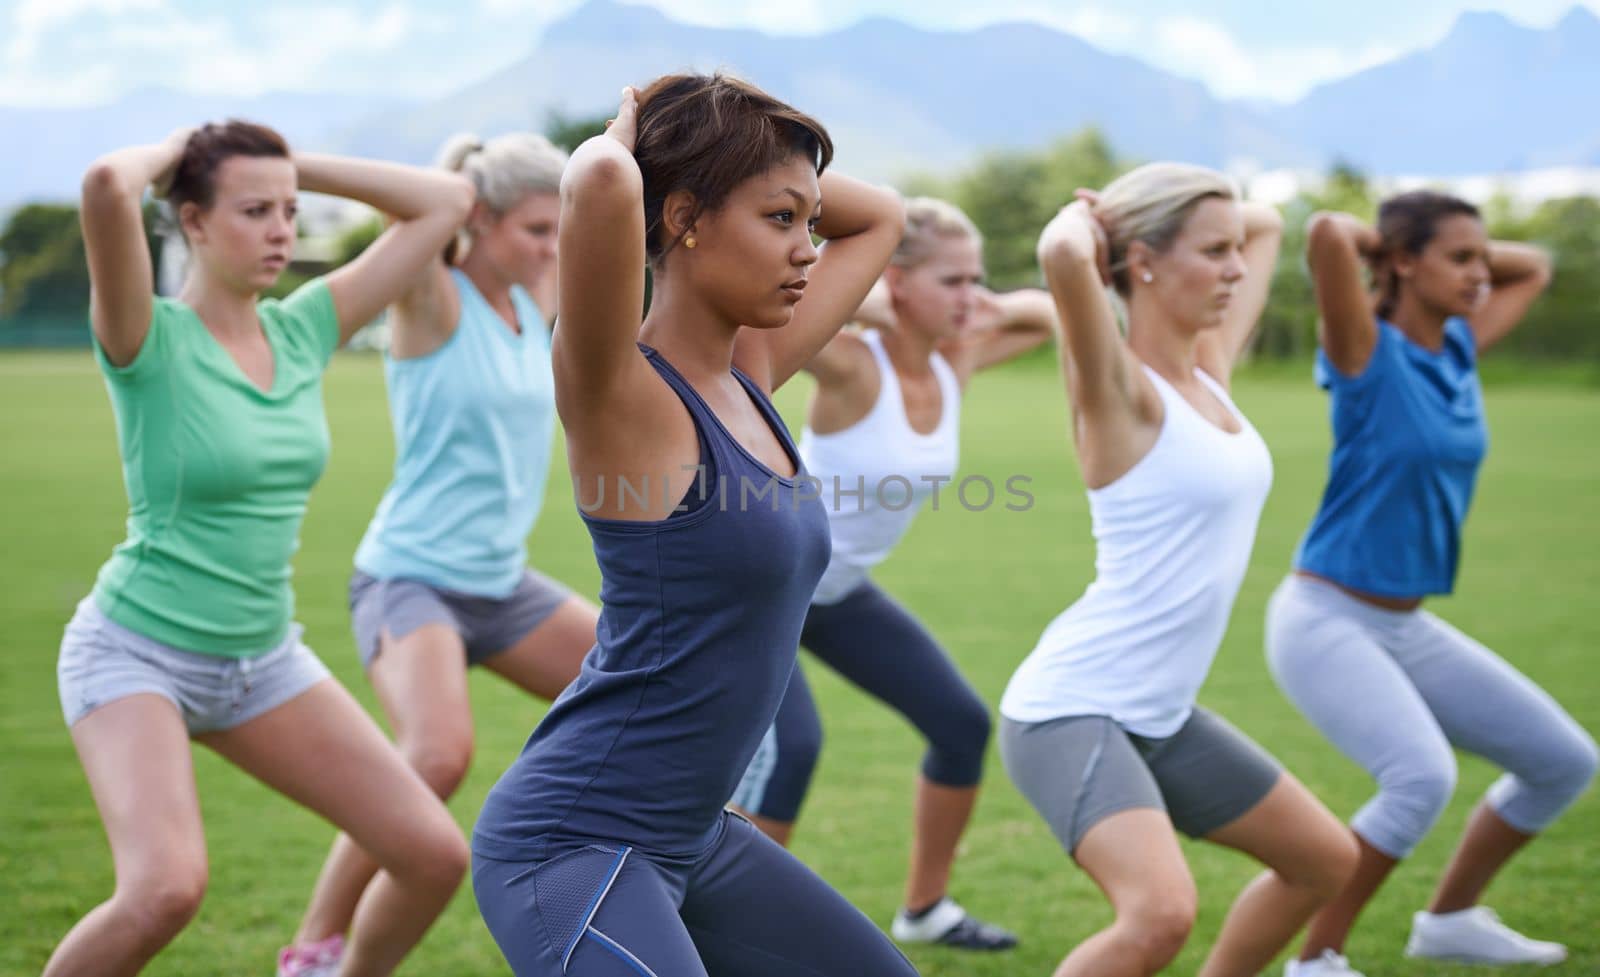 Sunshine and exercise. a group of young women exercising outdoors